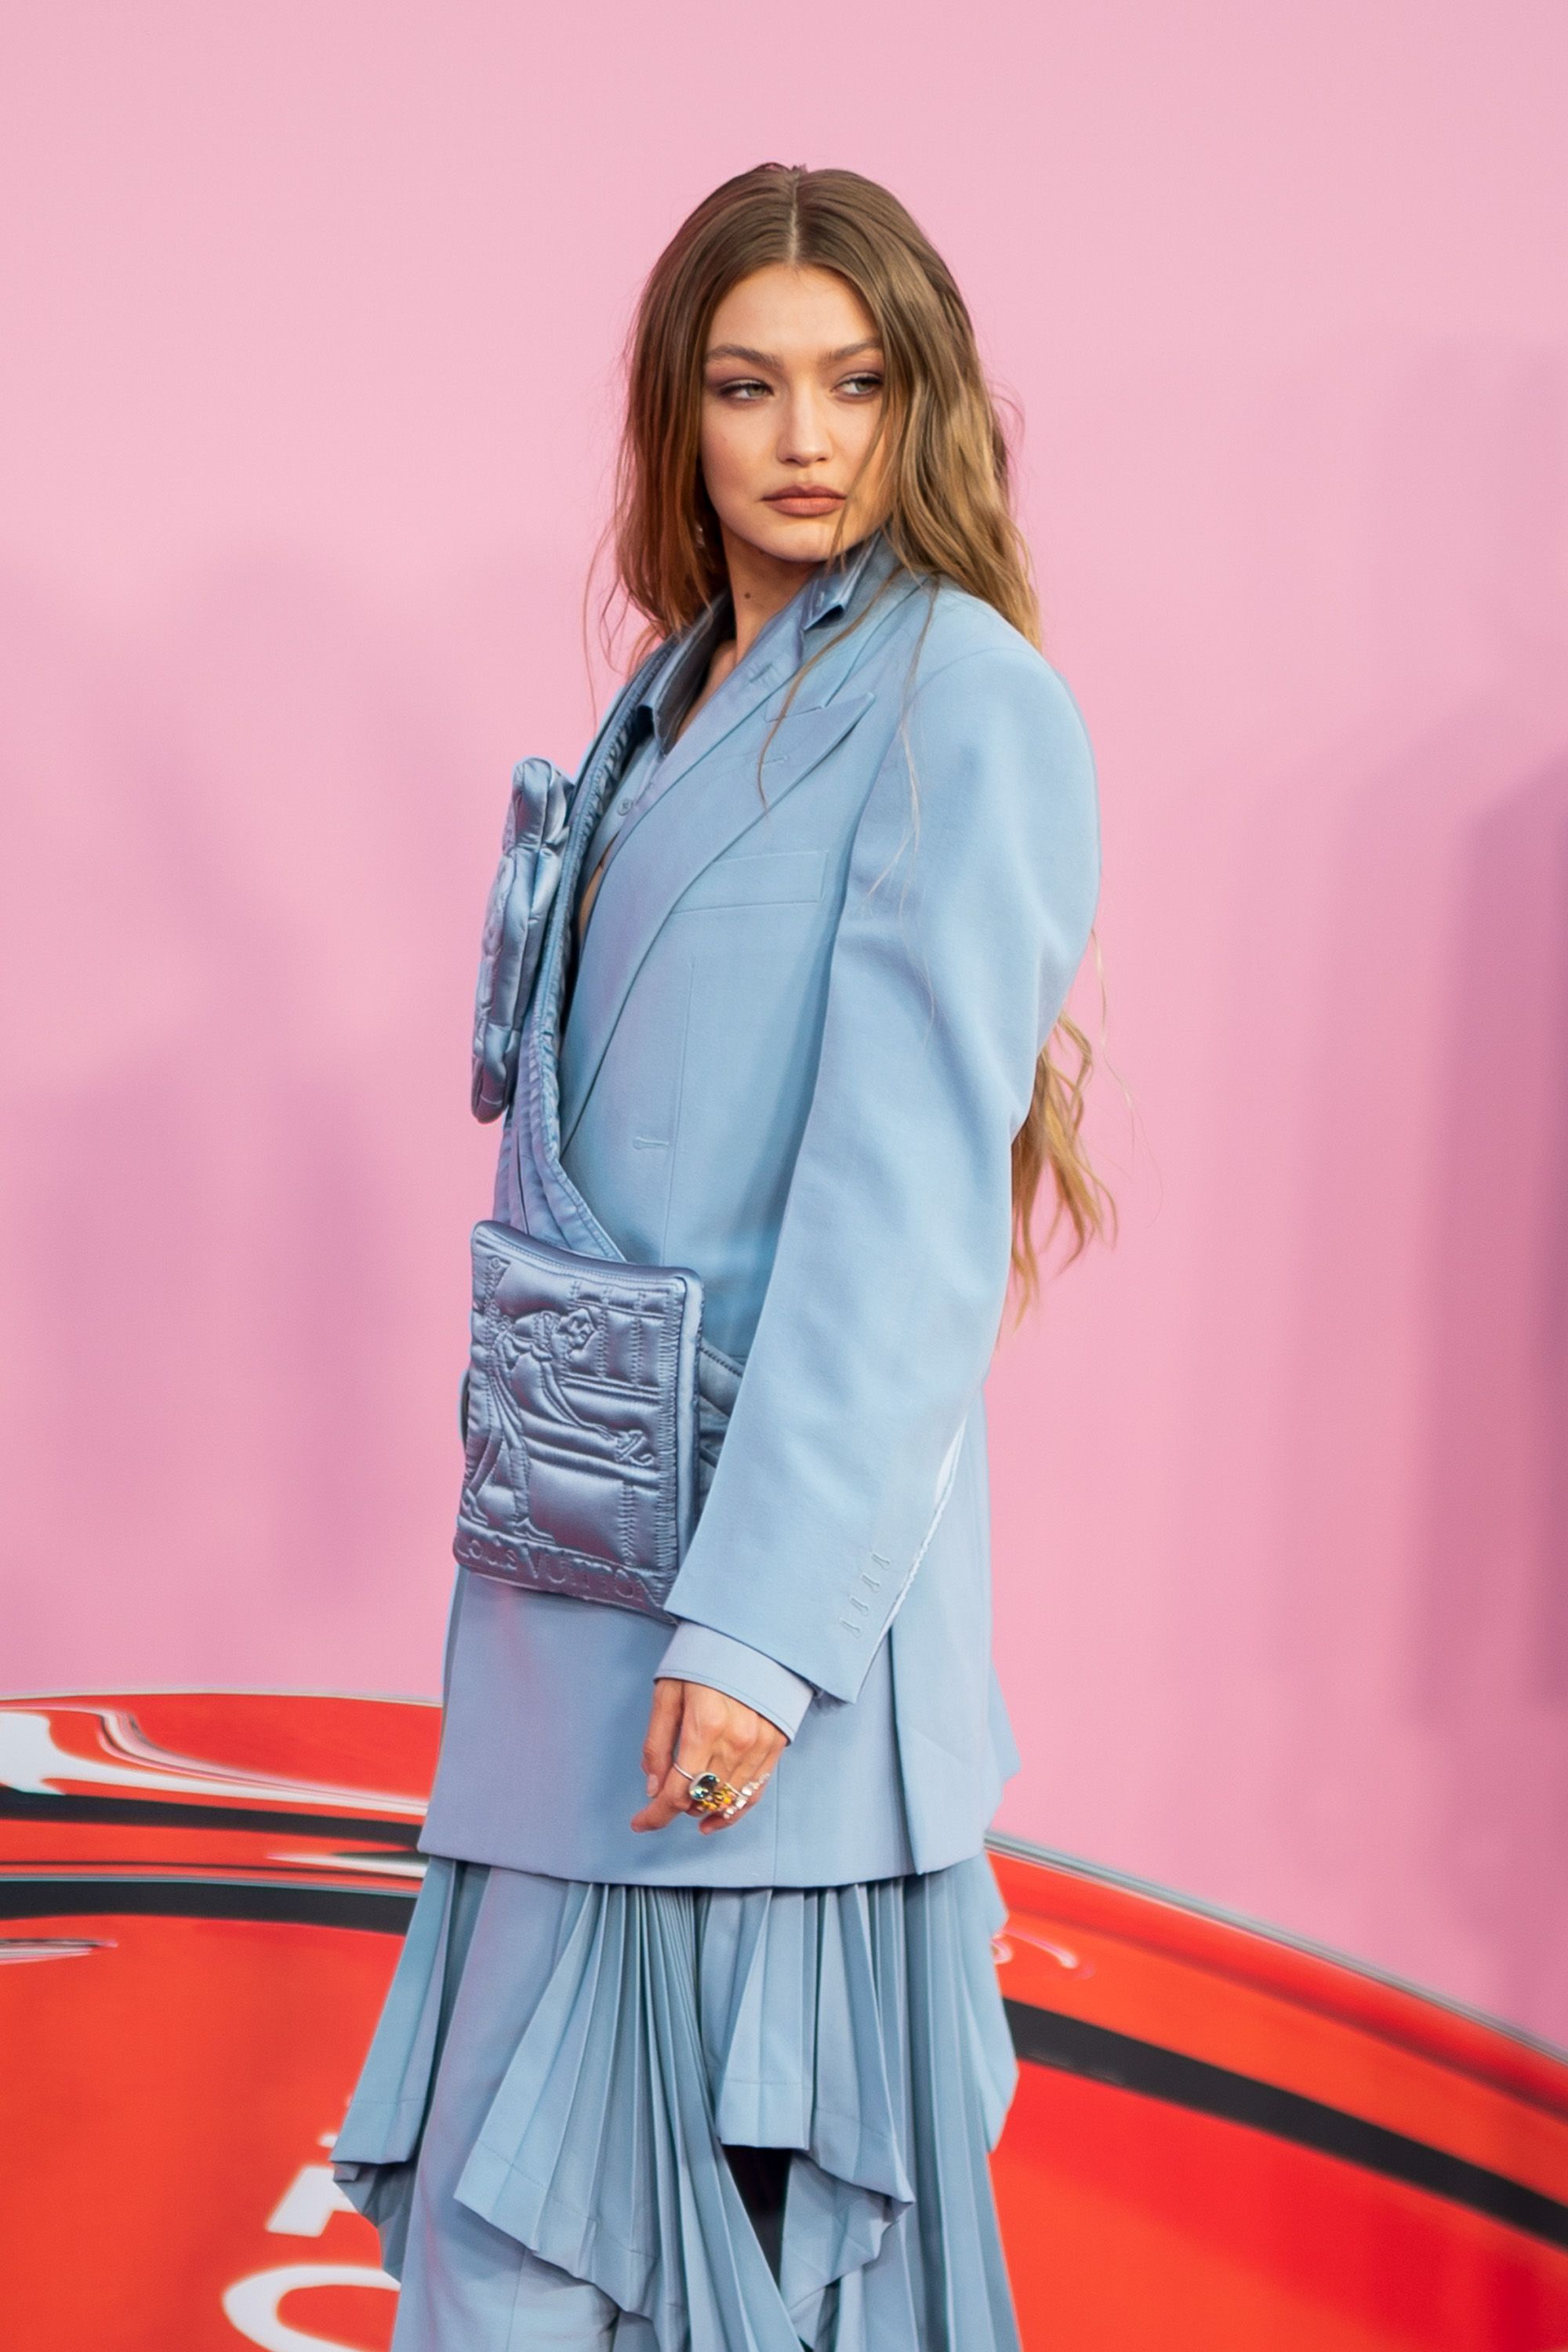 Gigi Hadid Swaps Out Millennial Pink for Baby Blue